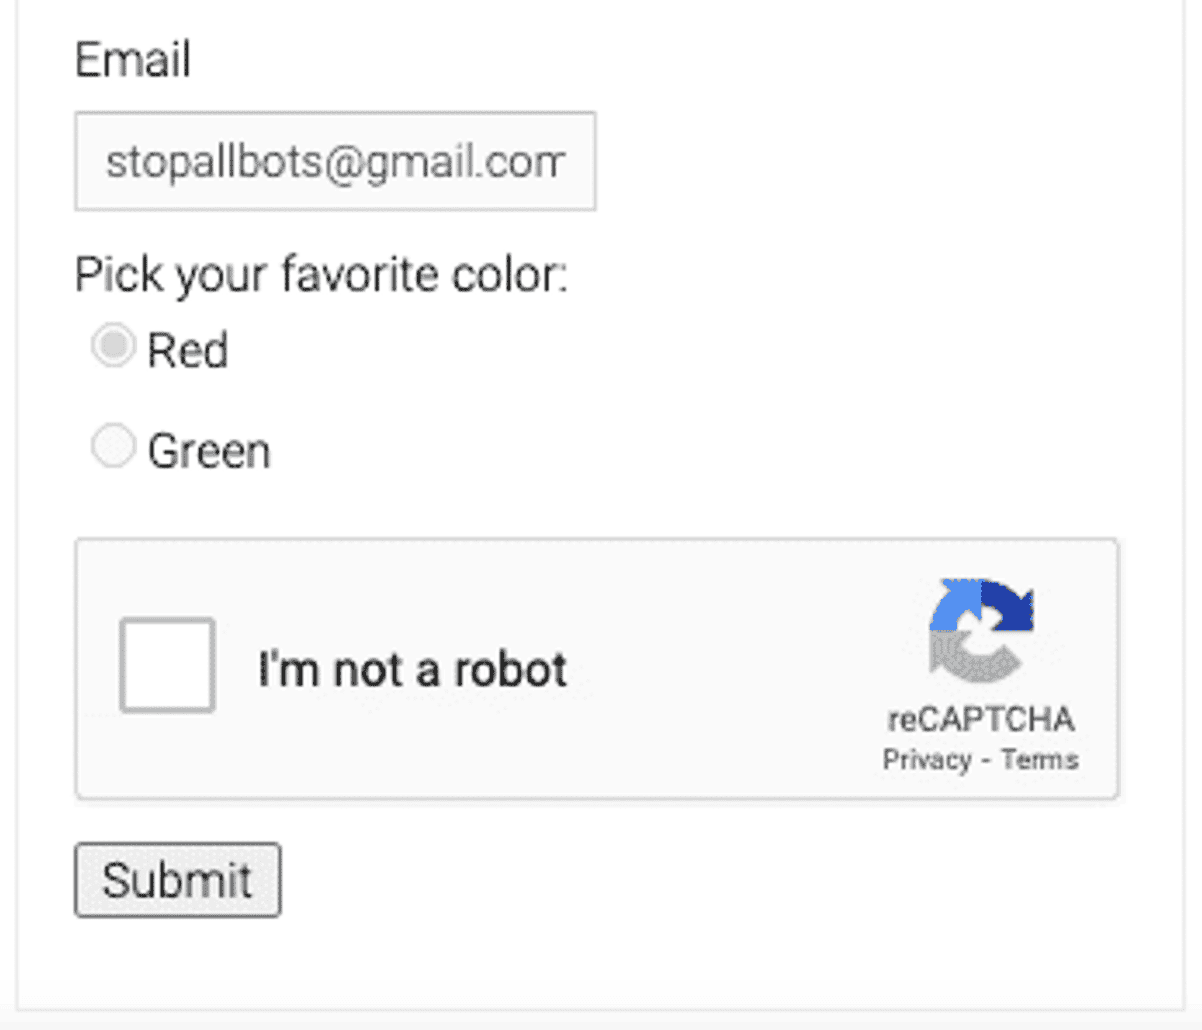 CAPTCHA in a form